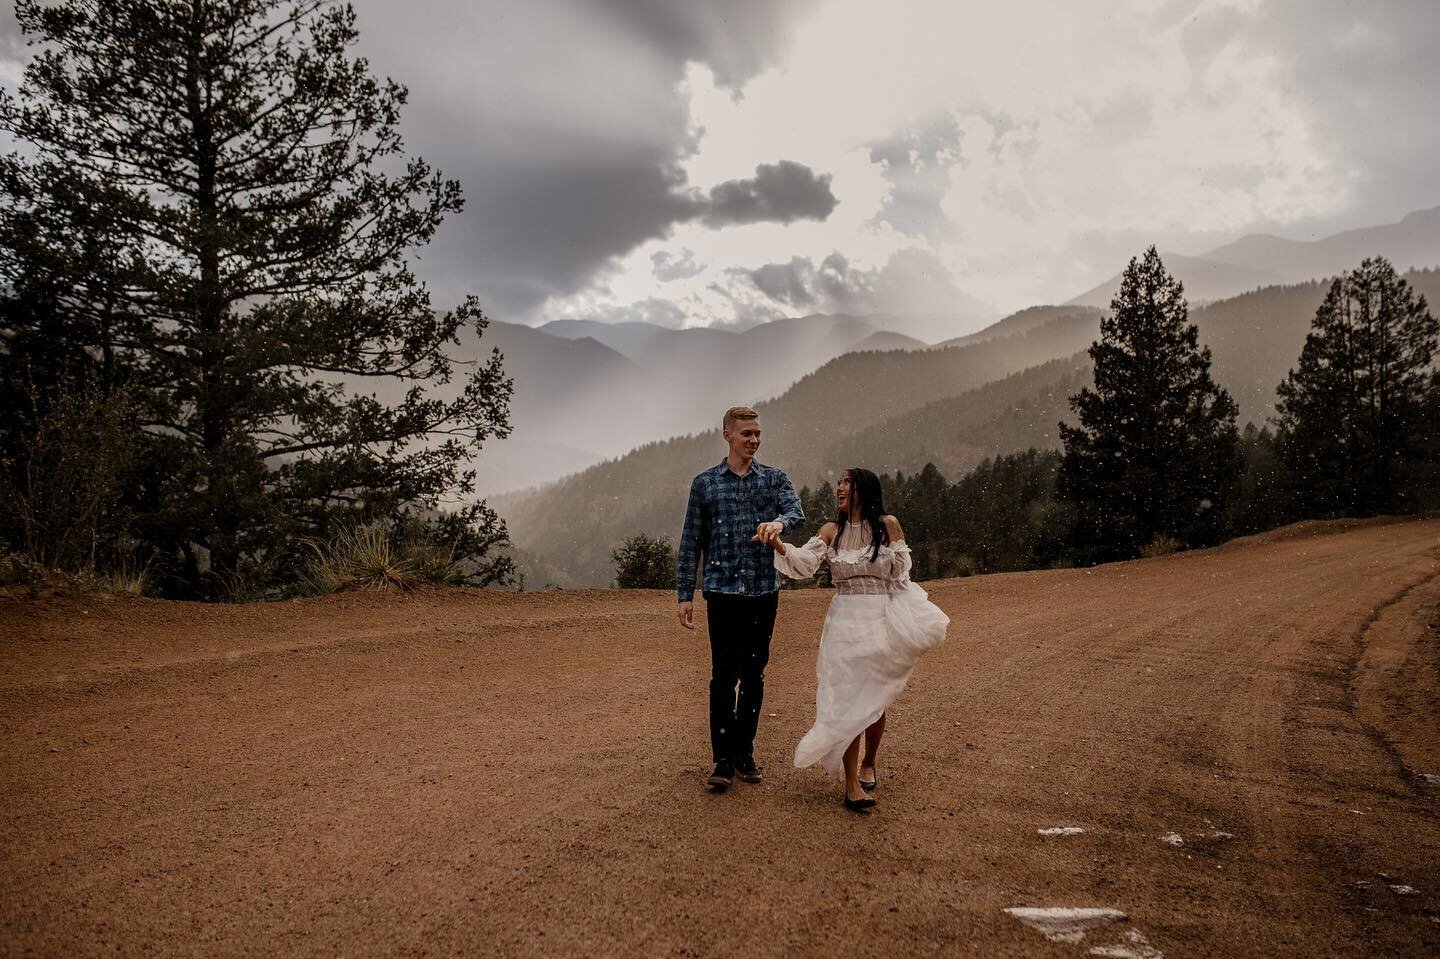 Dancing in the rain (maybe snow) on your special day in the mountains! Why not? 🤍

#coloradoweddingphotographer #weddingphotographer #2024couples #lovestories #loveandwildhearts #muchlove_ig #radlovestories #wildrootcollective #radstorytellers #wild